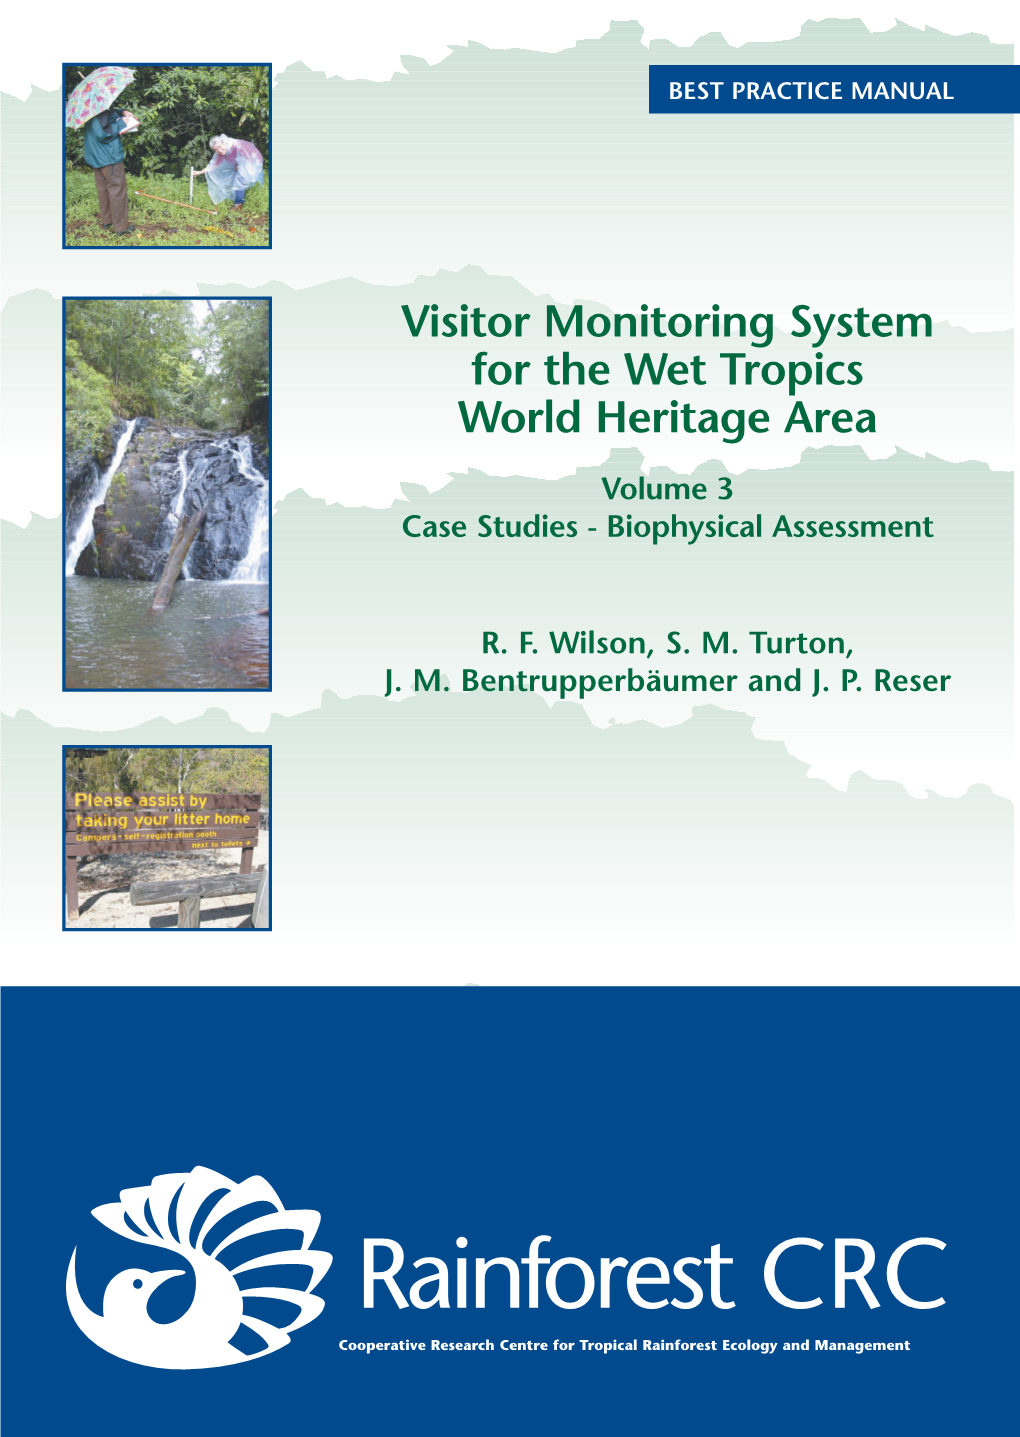 Visitor Monitoring System for the Wet Tropics World Heritage Area